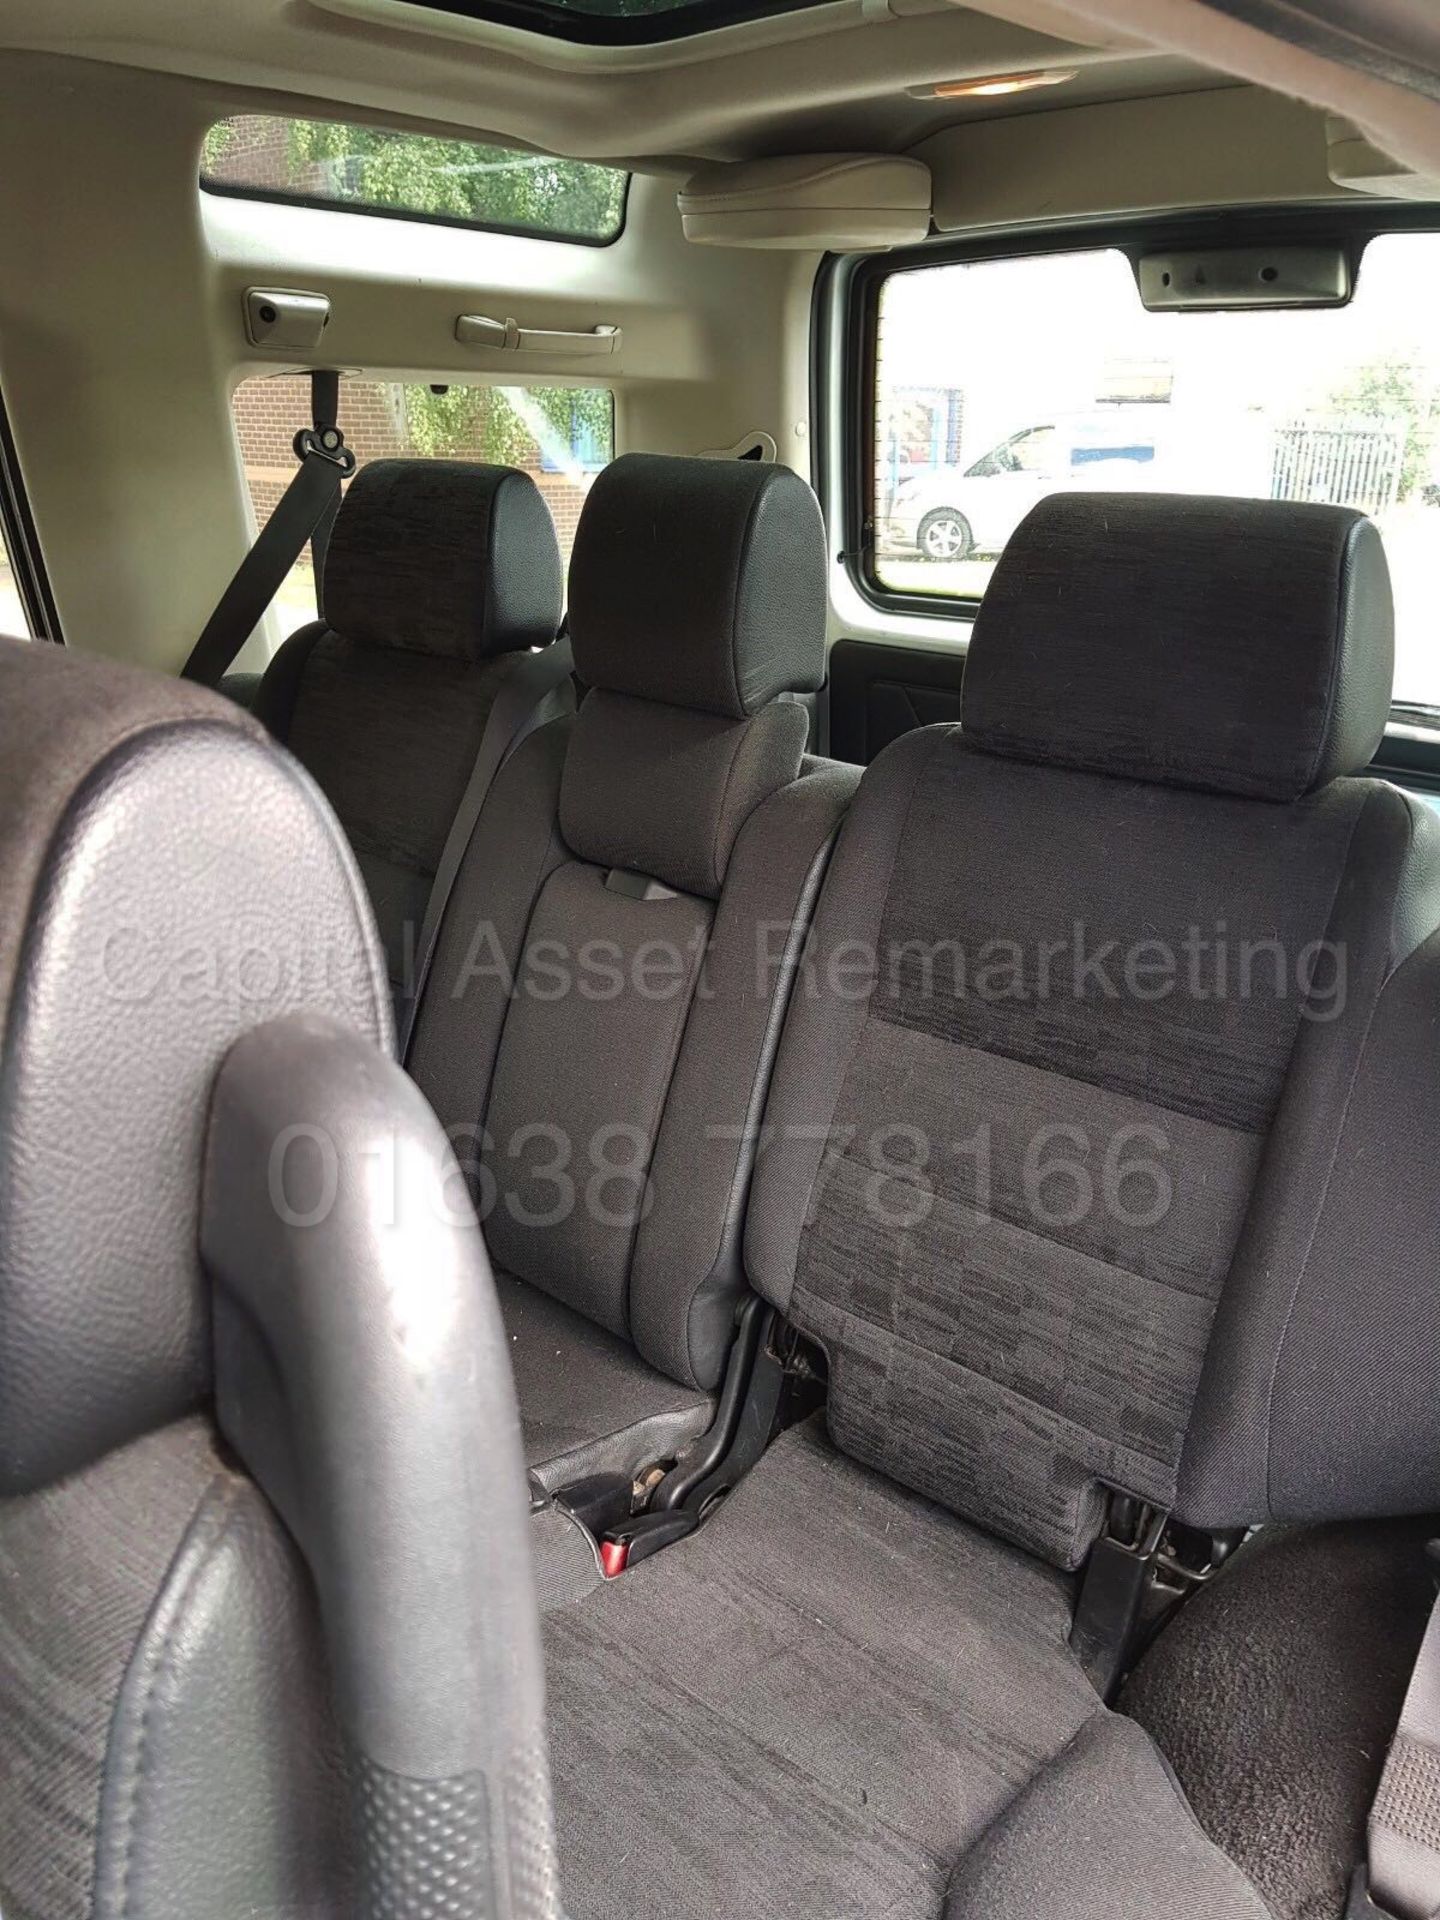 (On Sale) LAND ROVER DISCOVERY 'GS EDITION' (2004 MODEL) 'TD5 - AUTO - 7 SEATER' (NO VAT - SAVE 20%) - Image 11 of 16